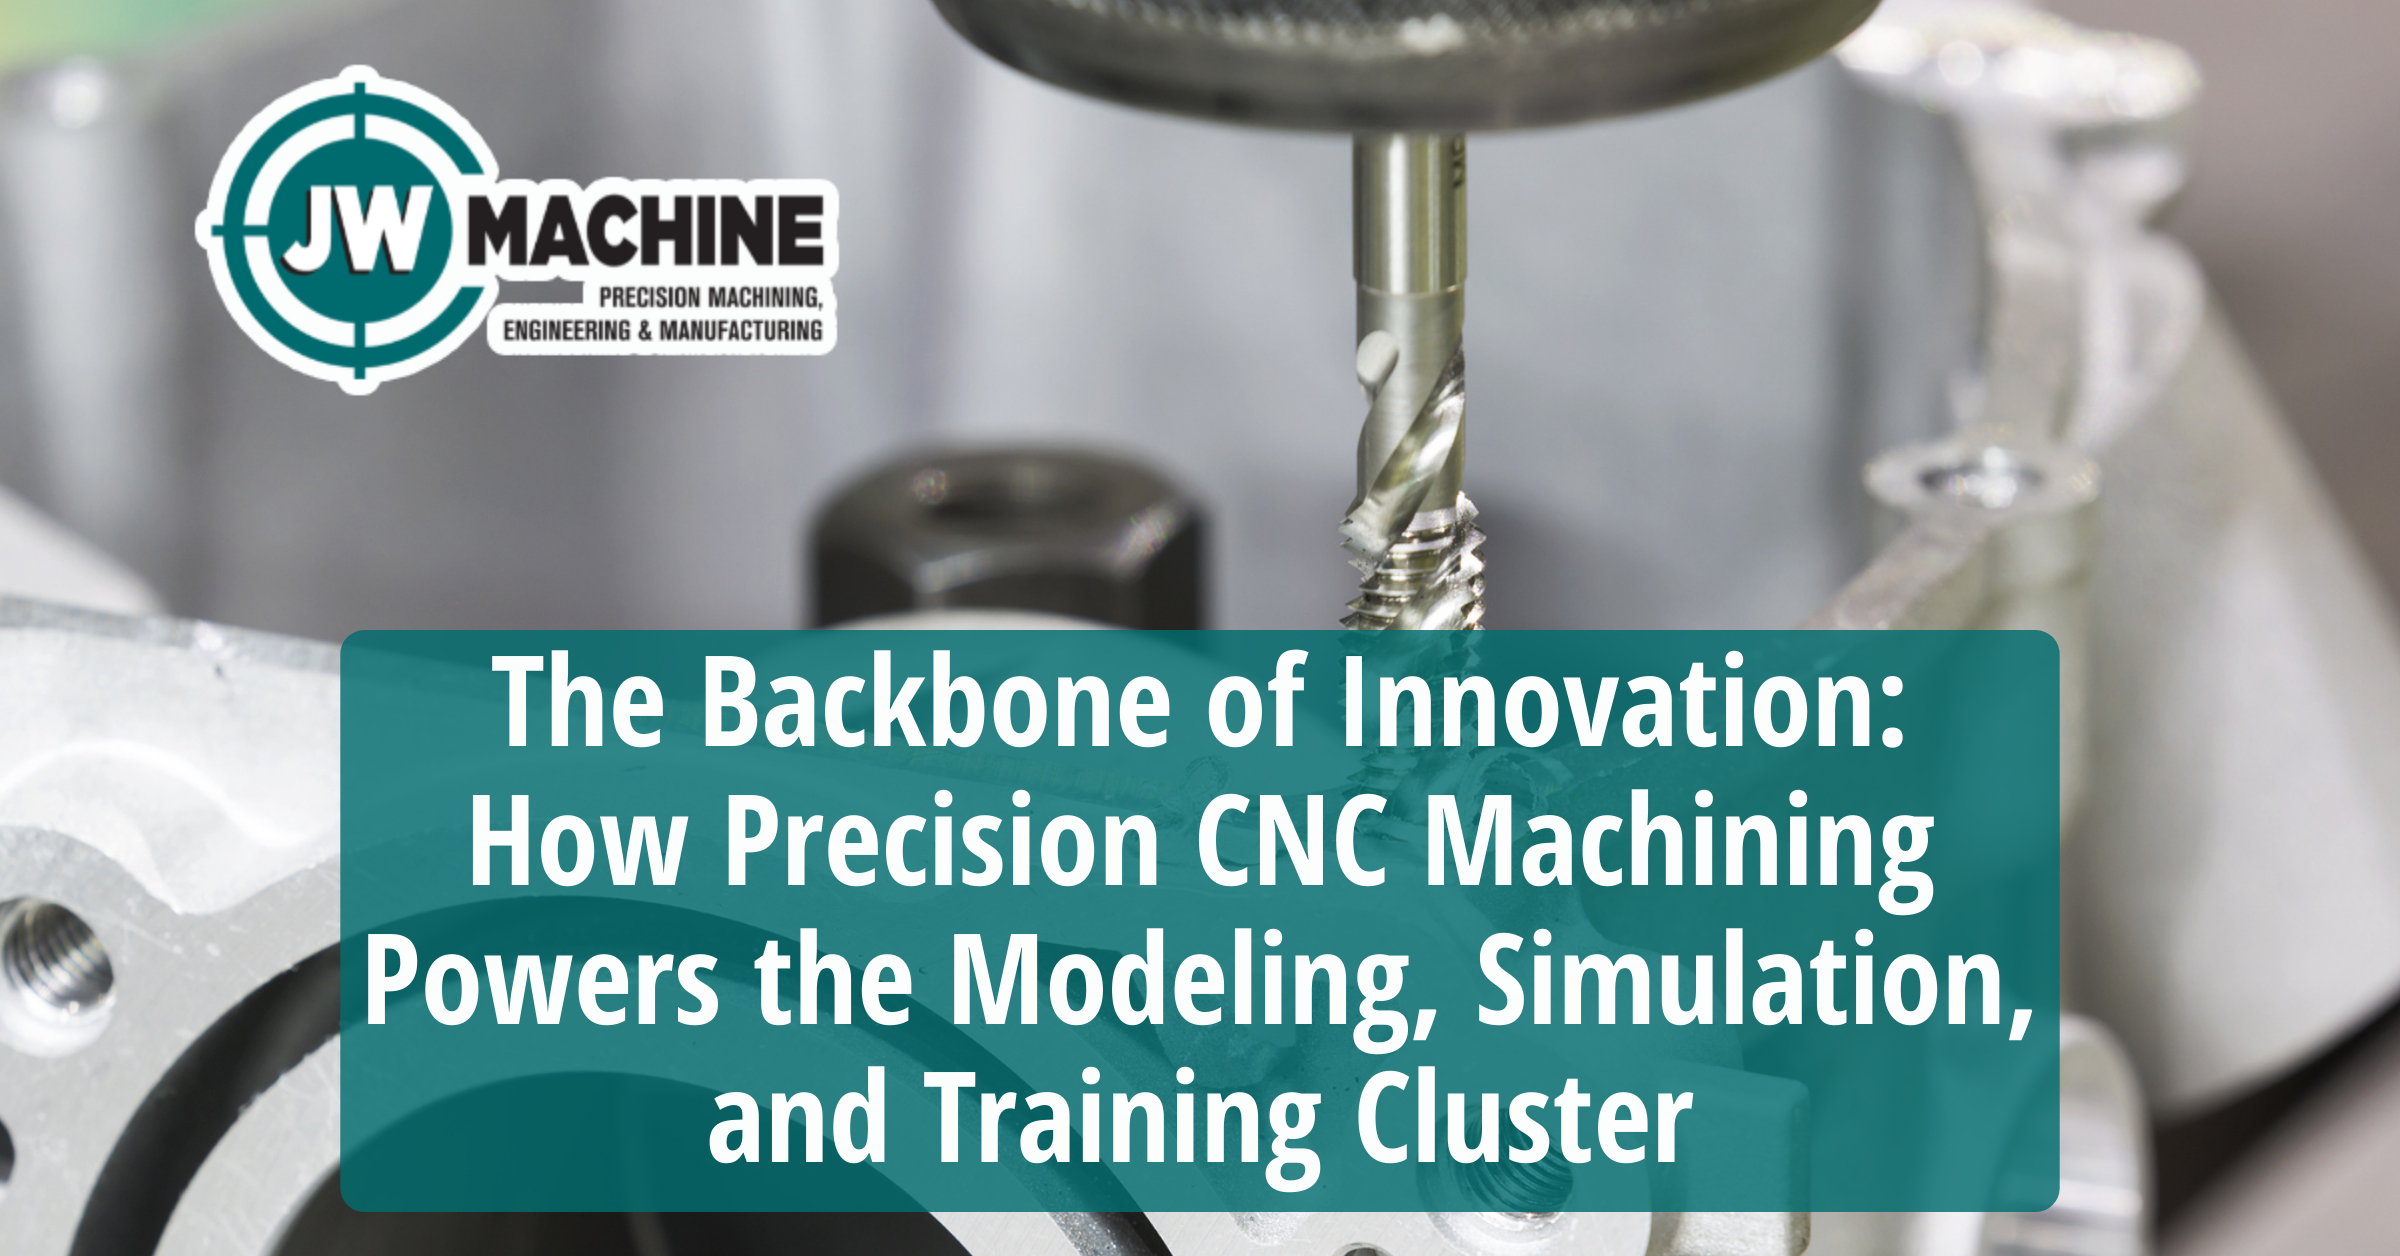 Precision CNC Machining Powers the Modeling